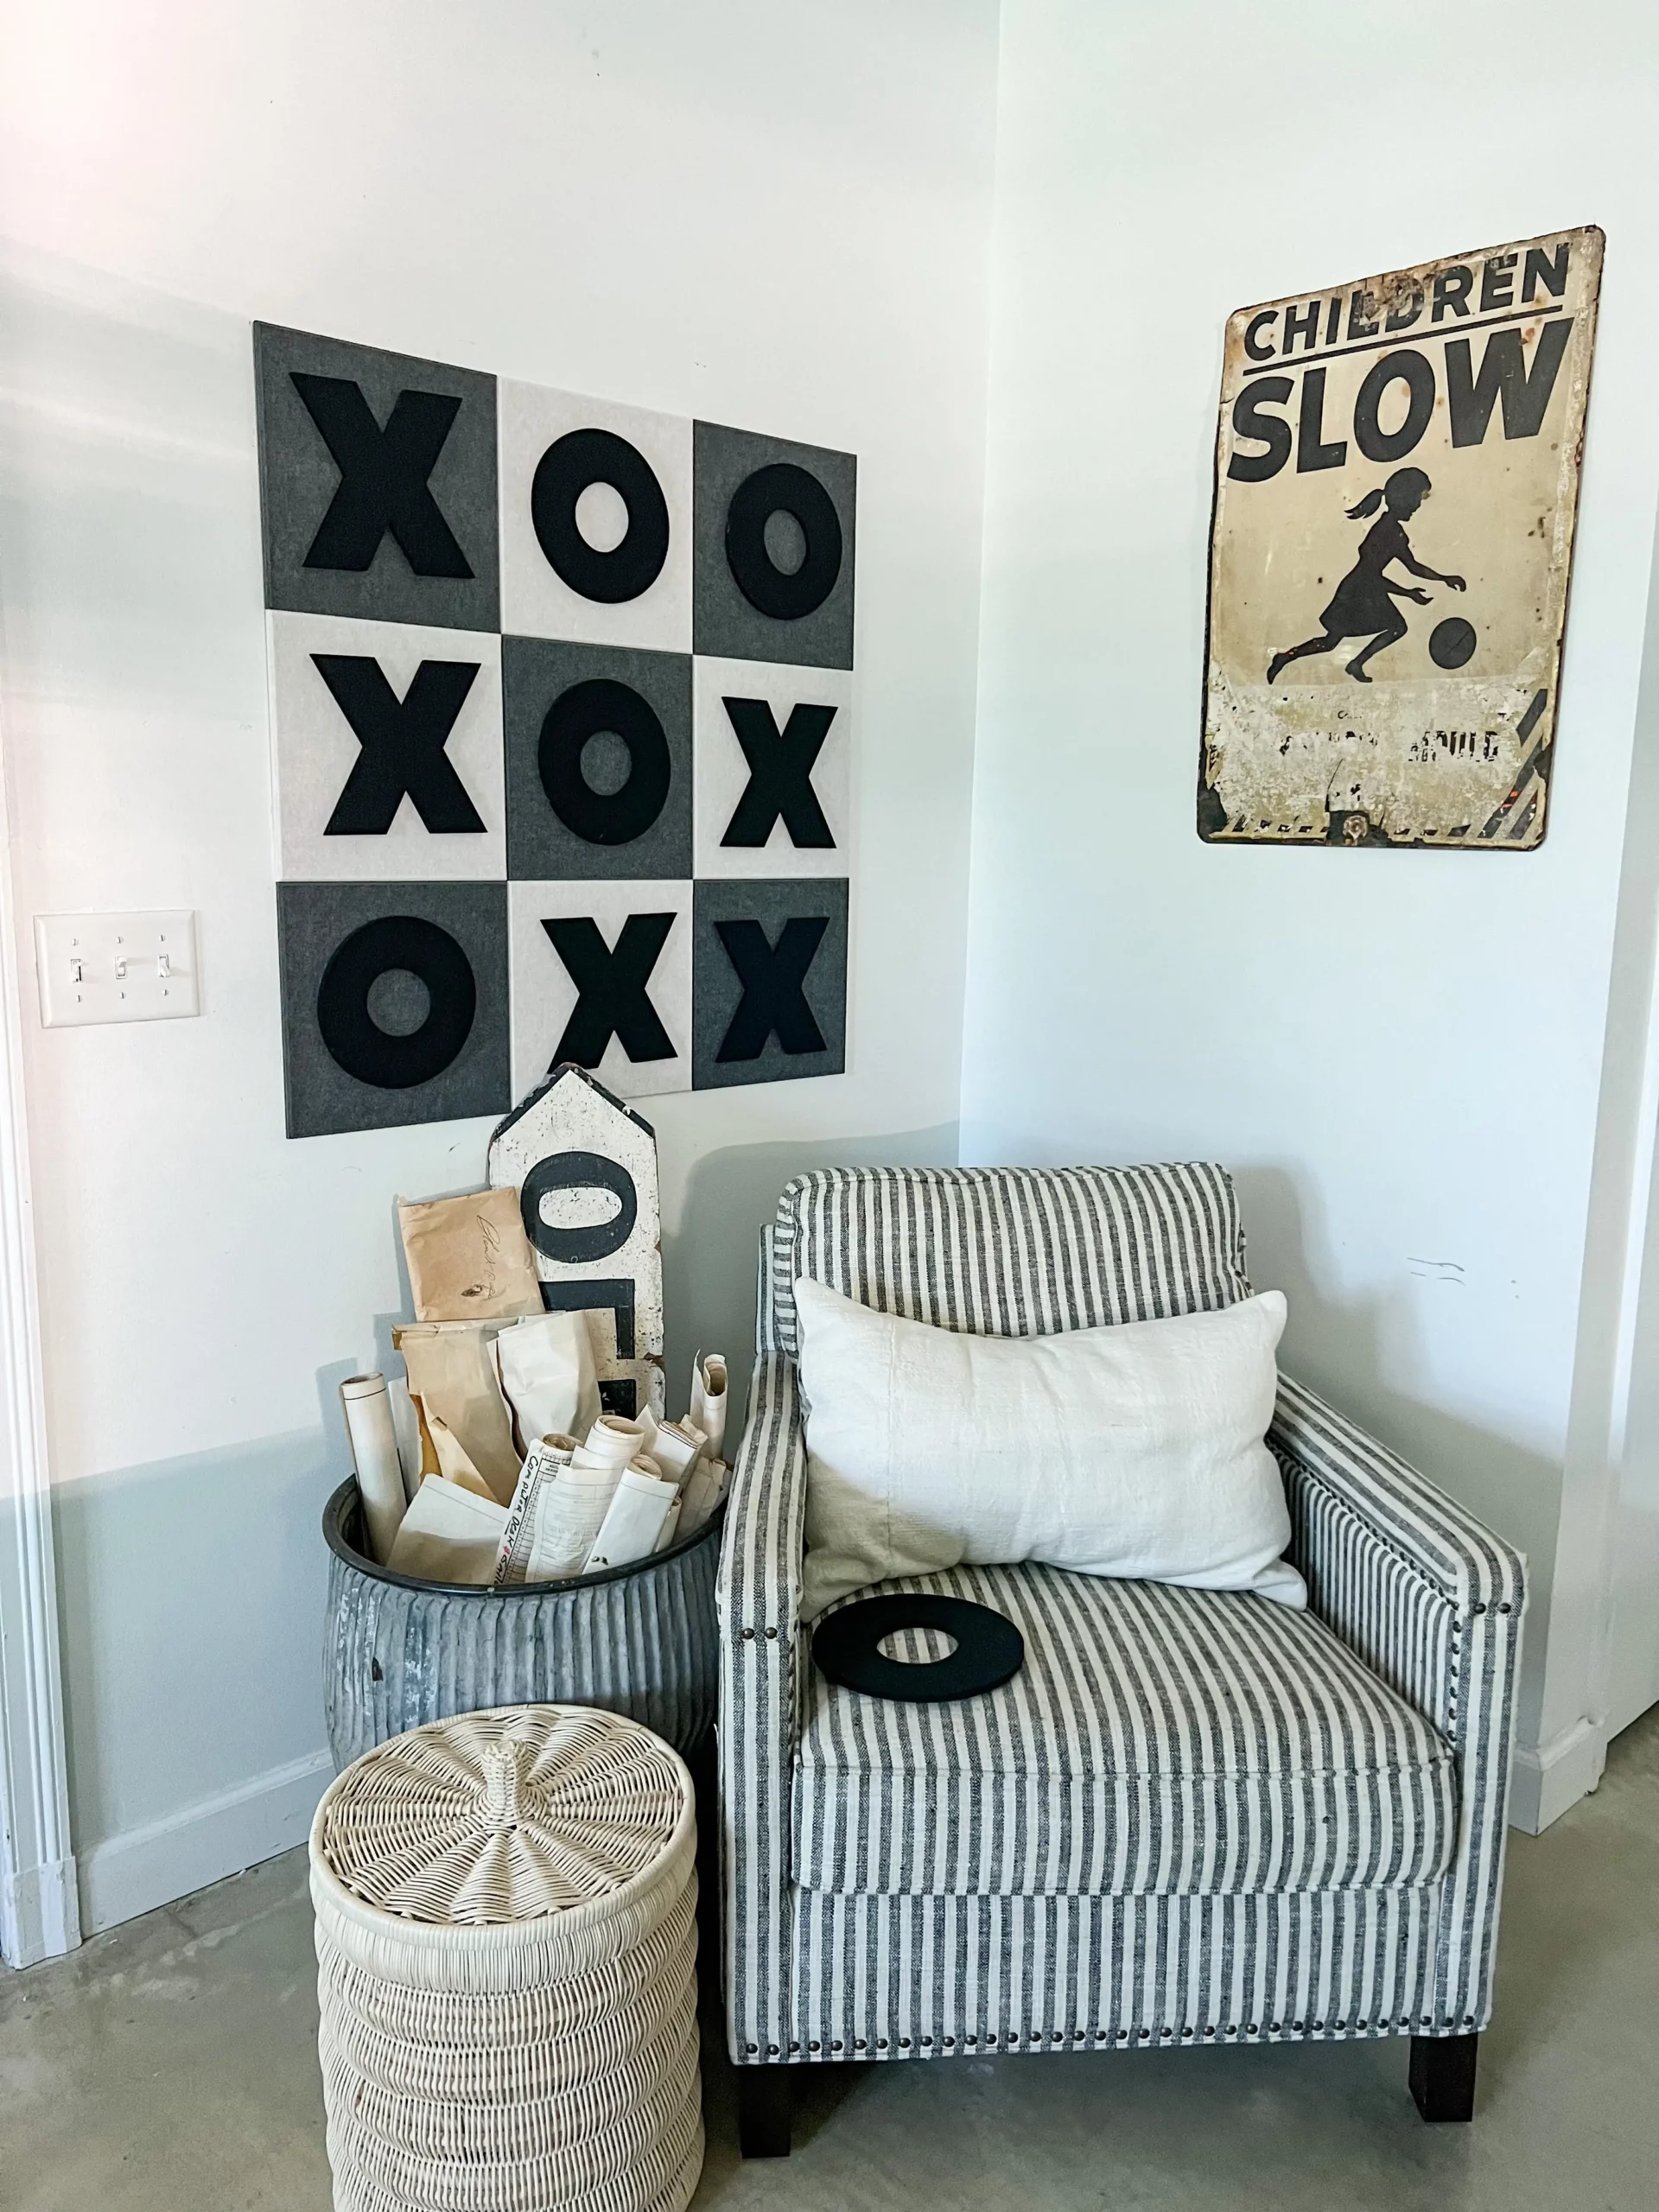 felt tic tac toe board behind a cozy striped chair in the game room